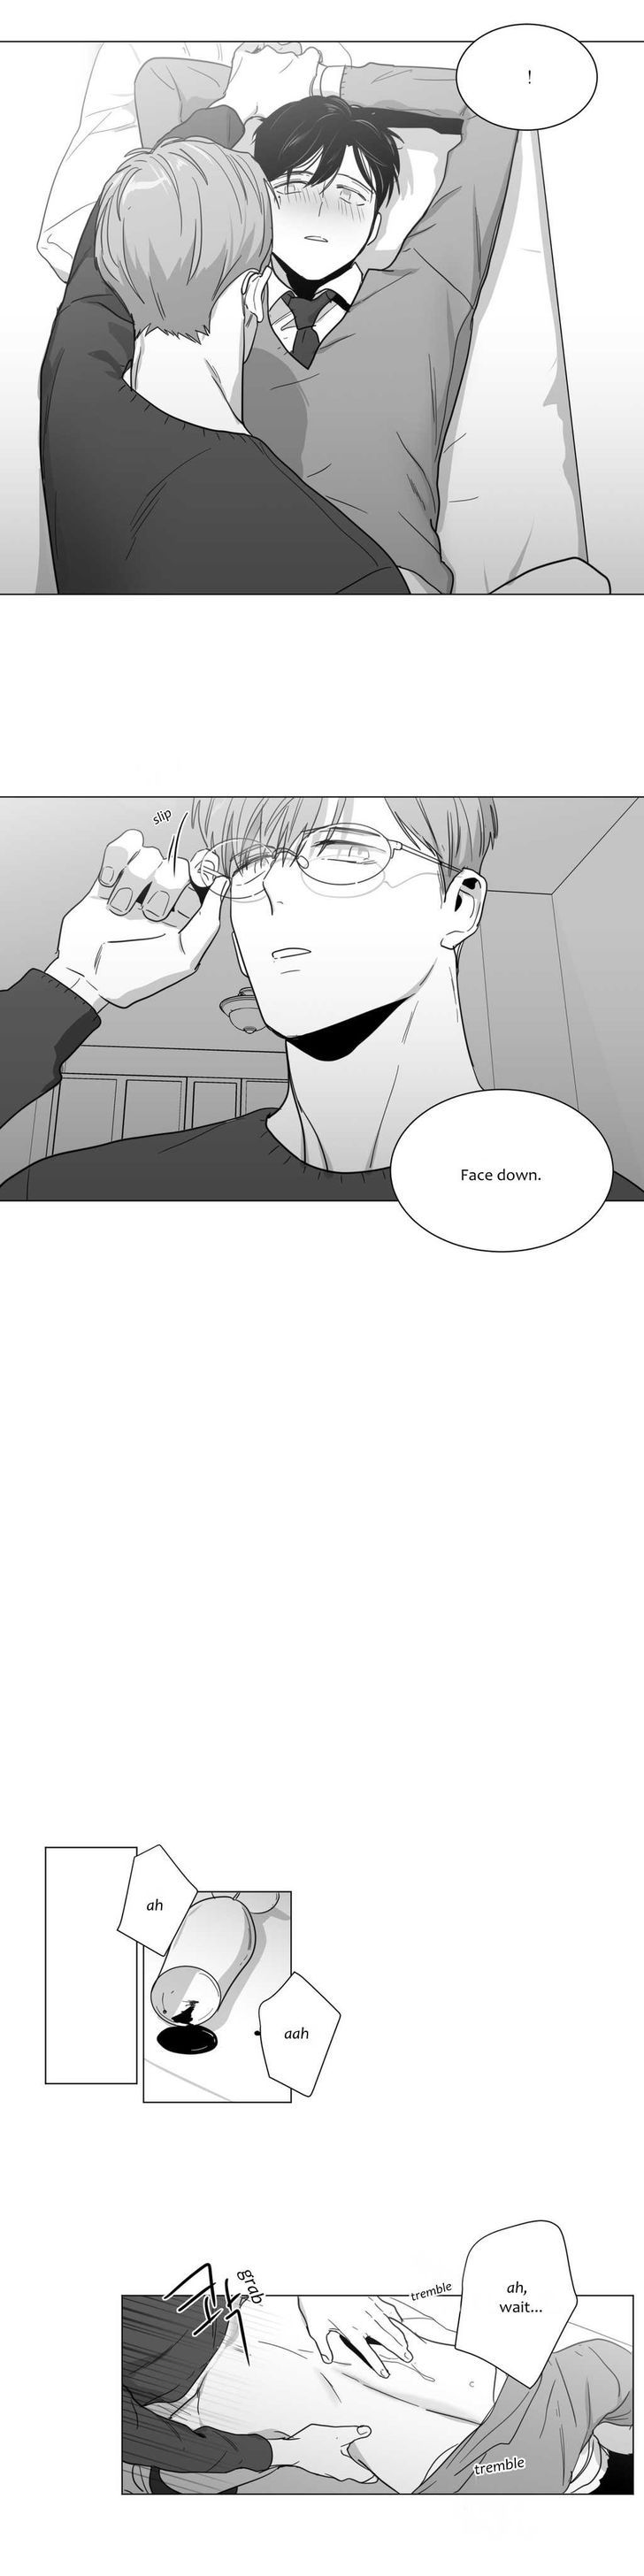 Lover Boy (Lezhin) Chapter 013 page 12